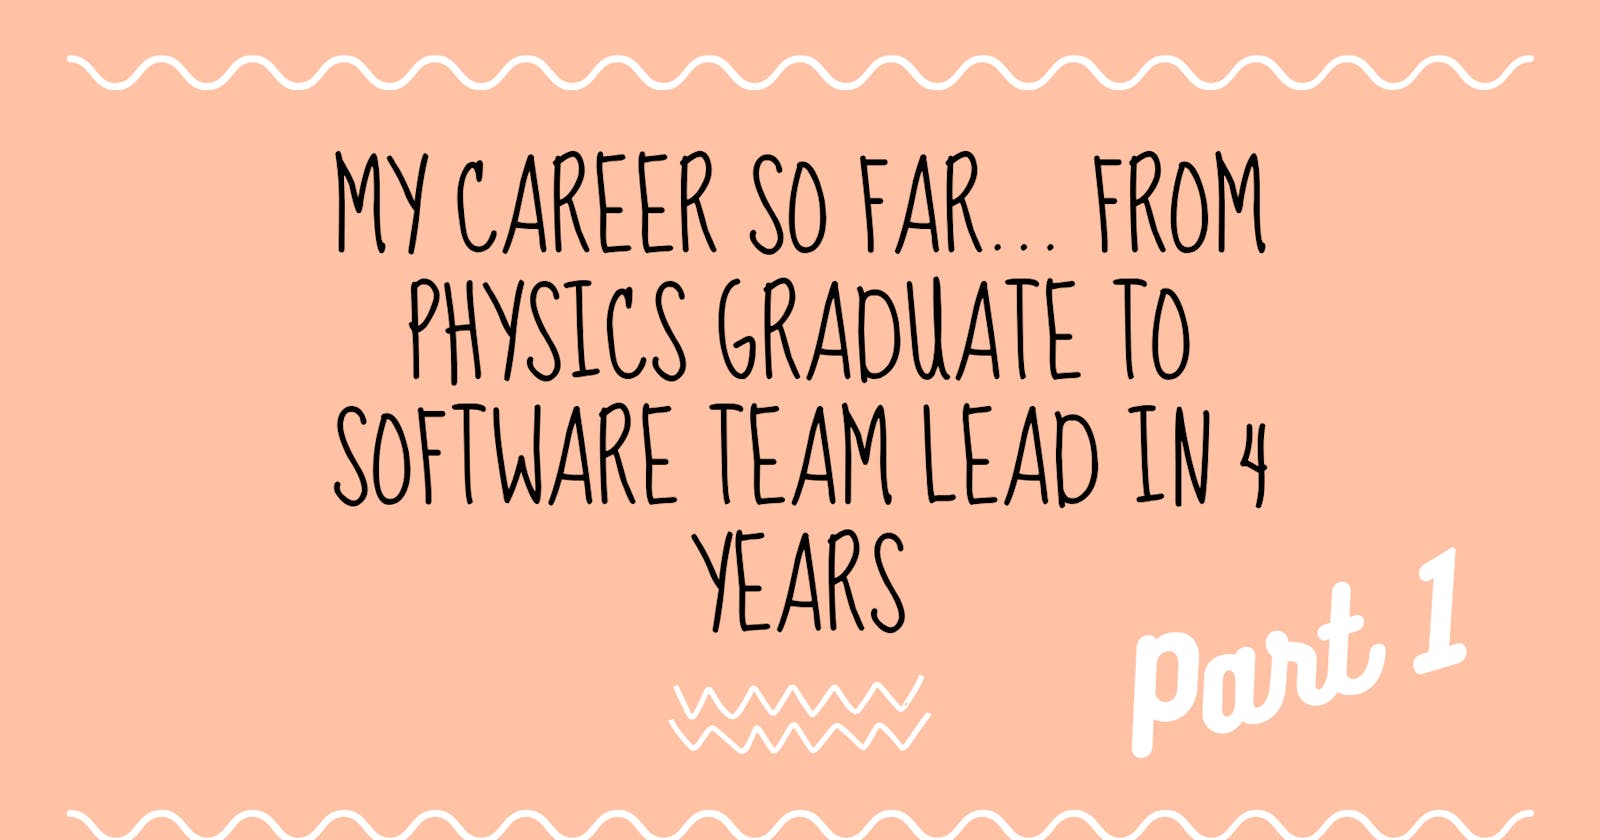 My career so far... from Physics graduate to Software Team Lead in 4 years